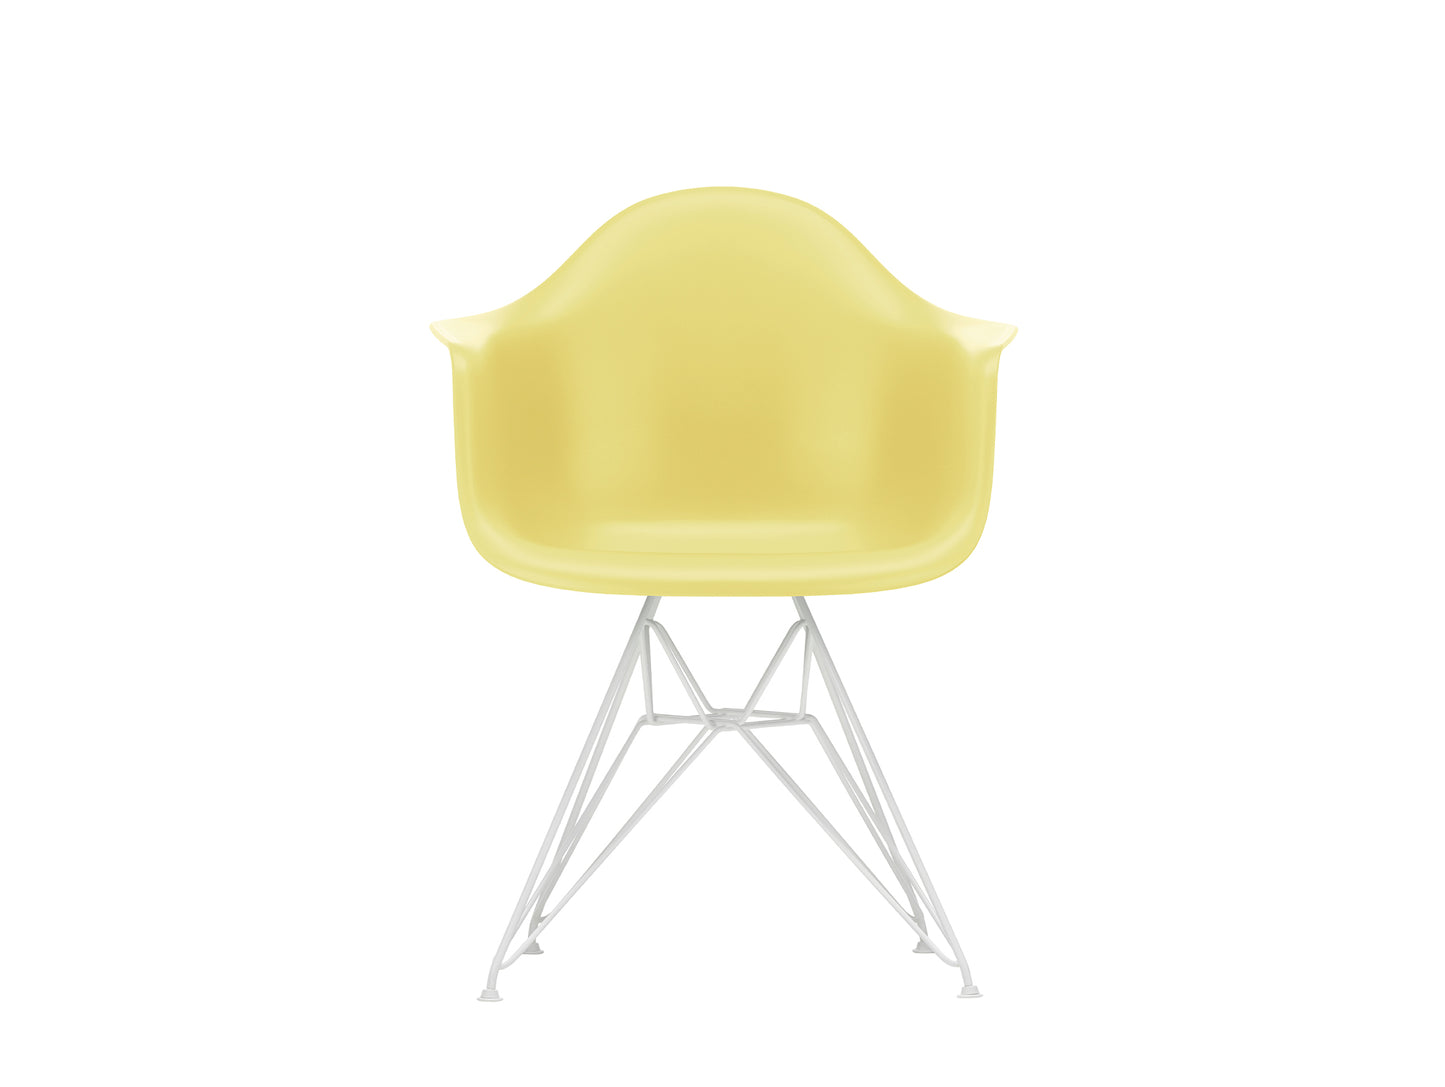 Eames DAR Plastic Armchair RE by Vitra - 92 Citron Shell / White Base